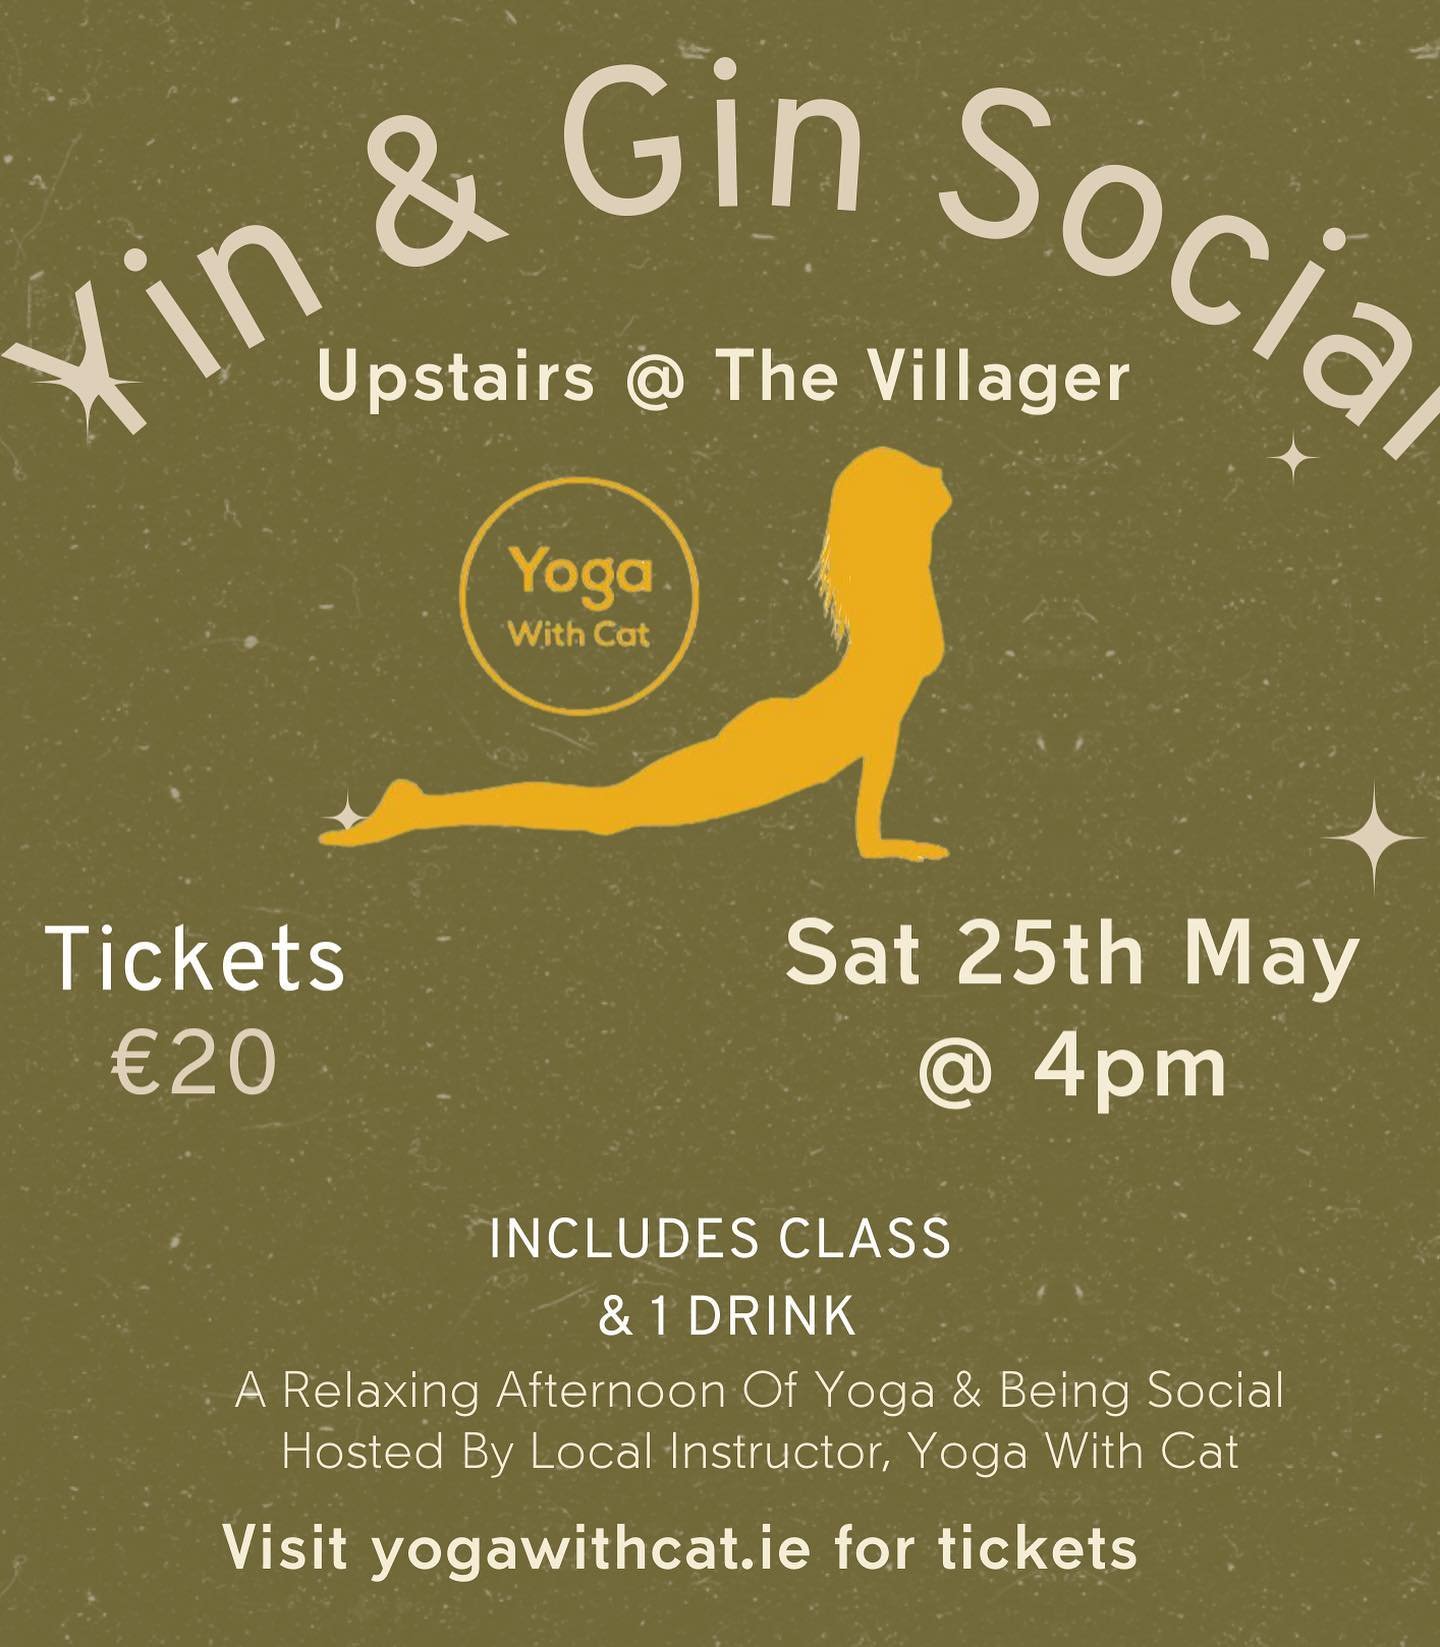 Rescheduled to Saturday 25th of May at 4 pm. Get your tickets on yogawithcat.ie